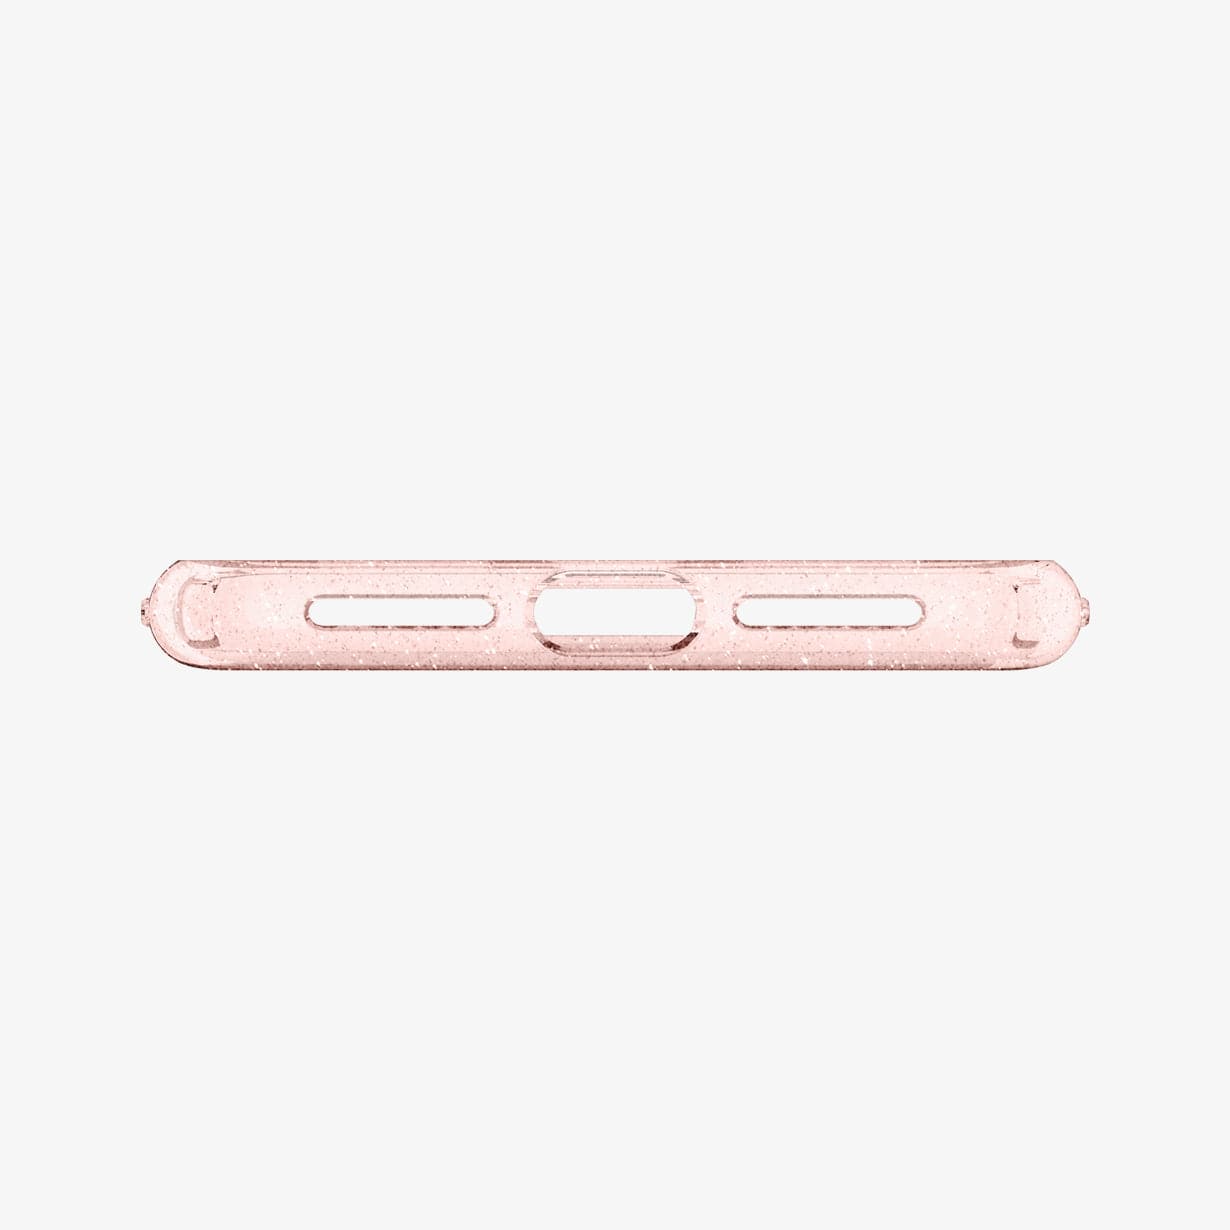 065CS25124 - iPhone XS Max Case Liquid Crystal Glitter in rose quartz showing the bottom with precise cutouts